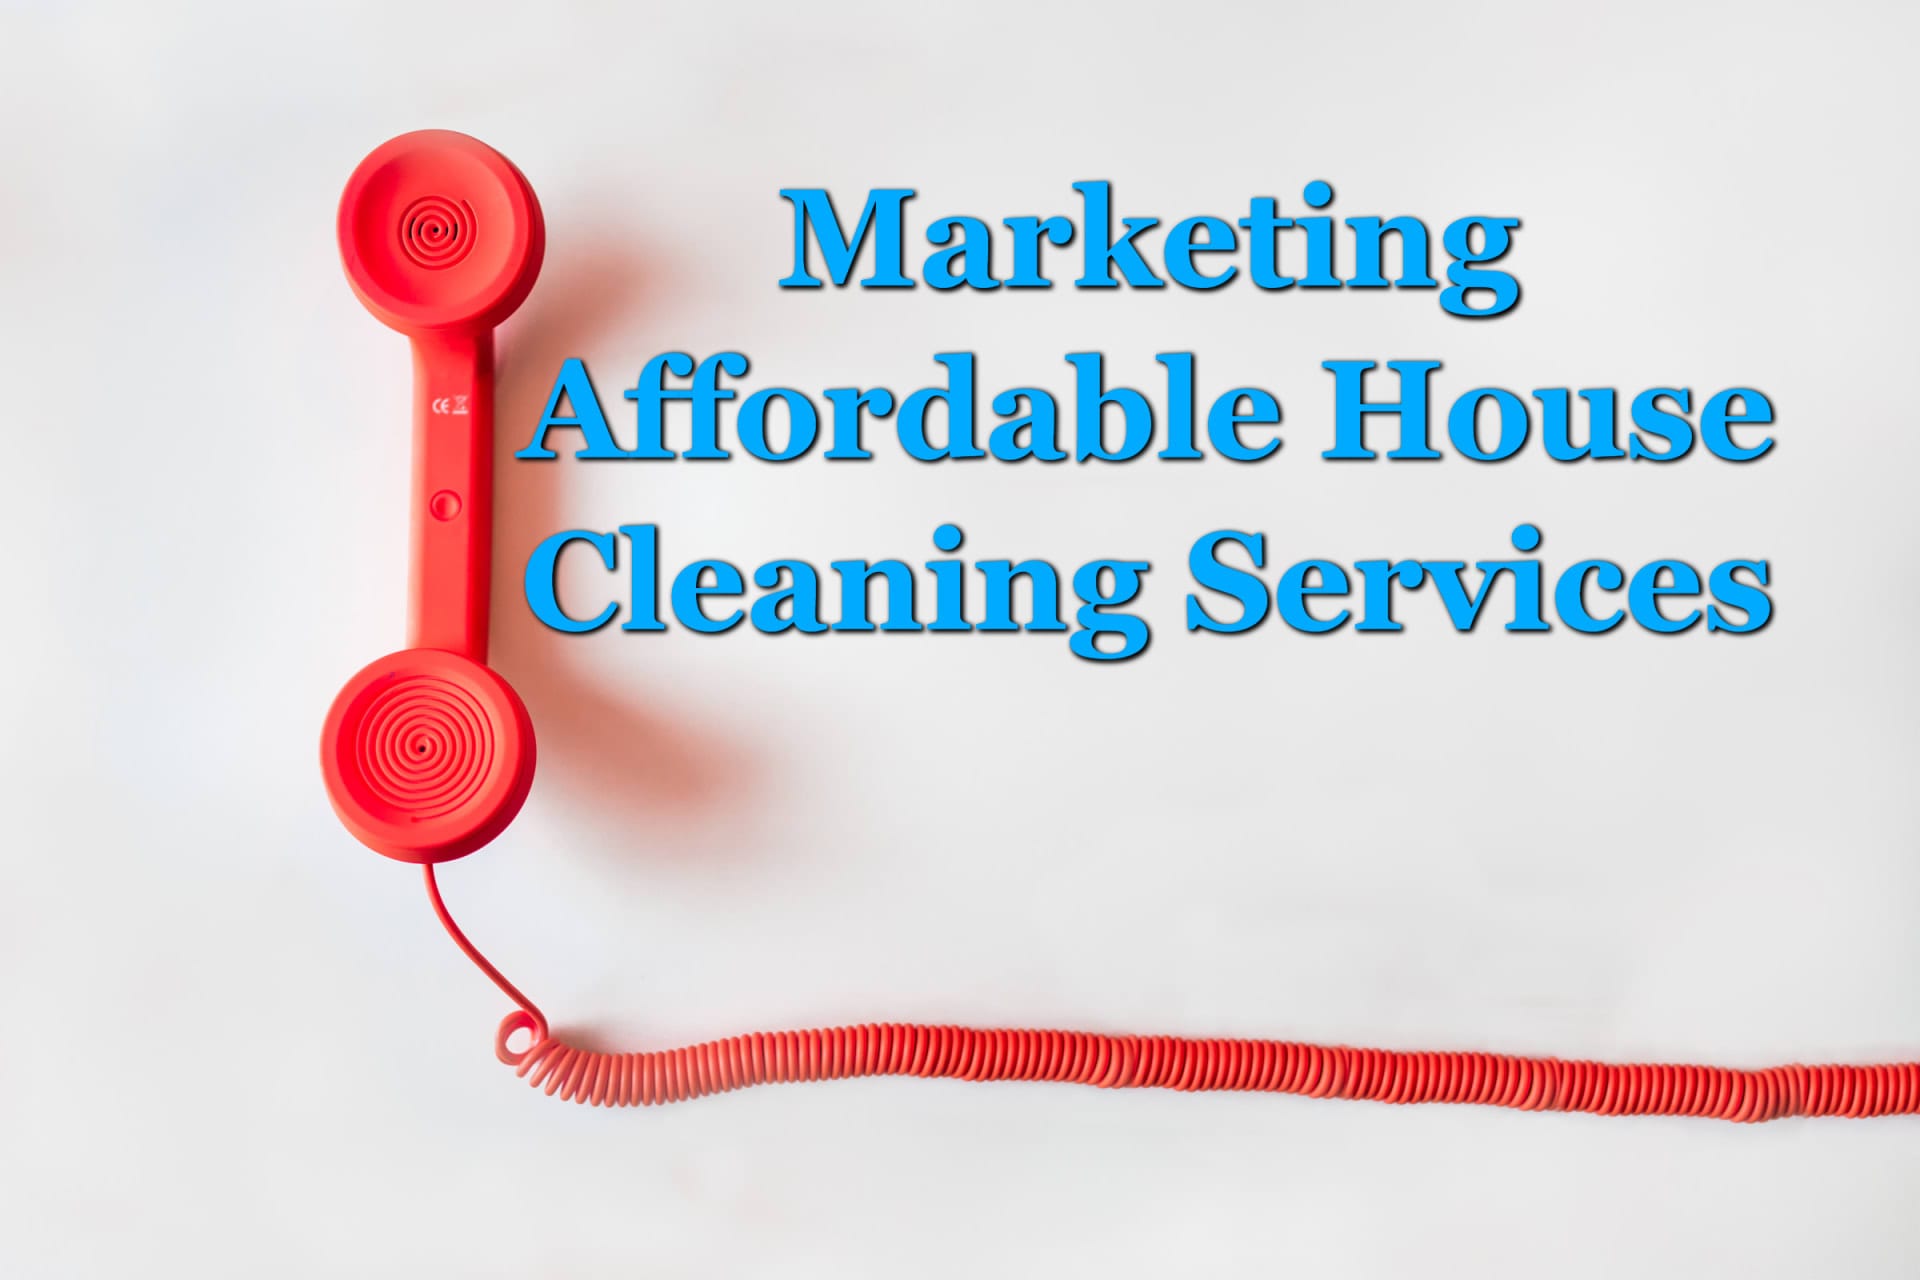 A telephone symbolizing the marketing of affordable house cleaning services